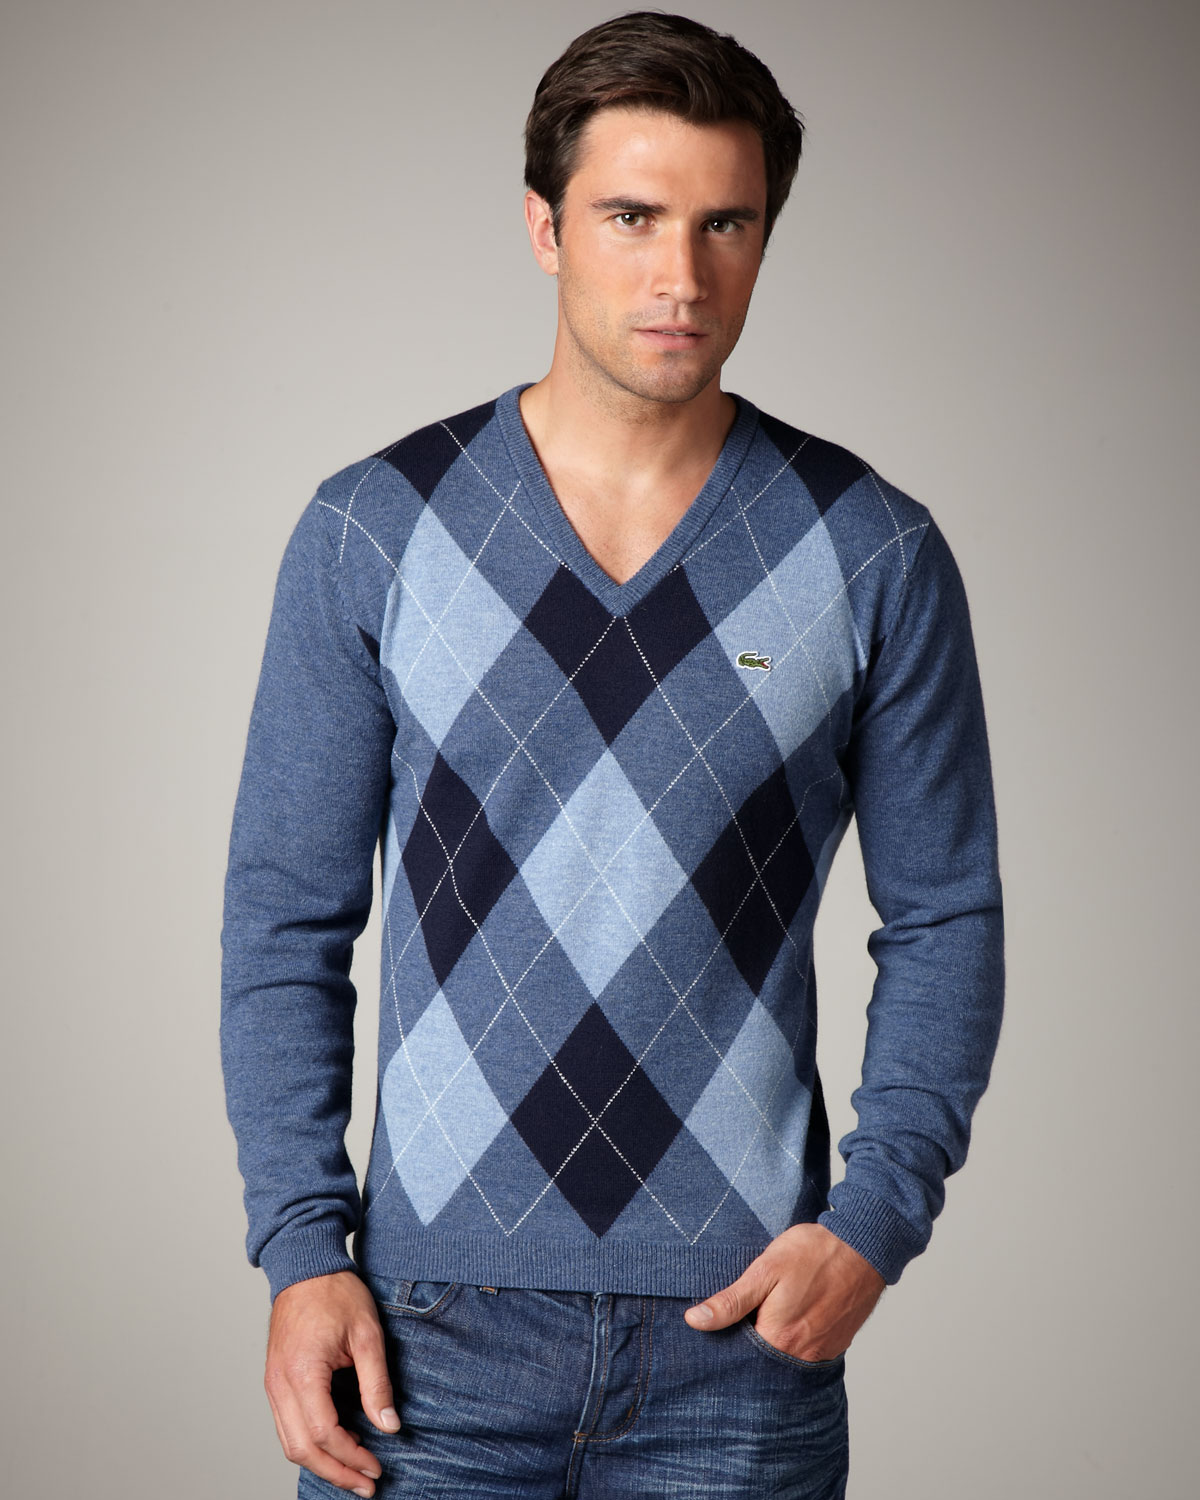 An overview of argyle sweaters